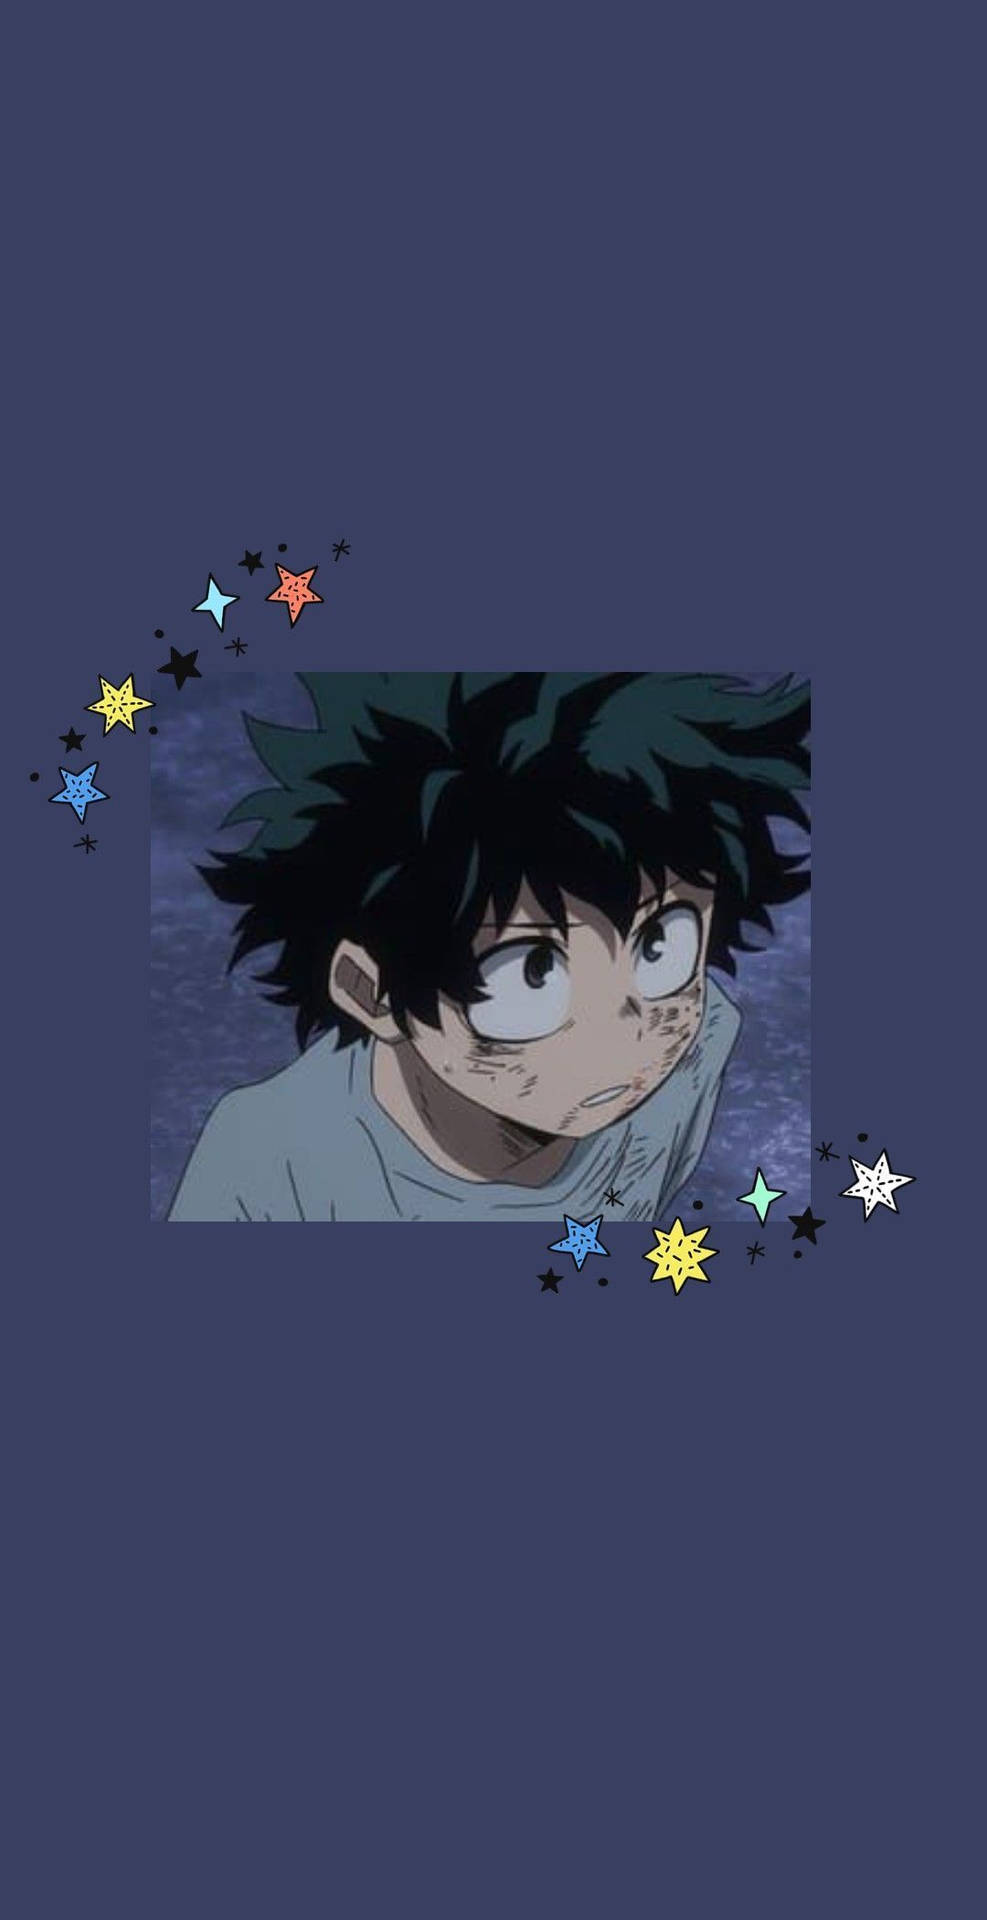 Aesthetic Anime Pfp - Top 20 Aesthetic Anime Profile Pictures, Pfp, Avatar,  Dp, icon [ HQ ]